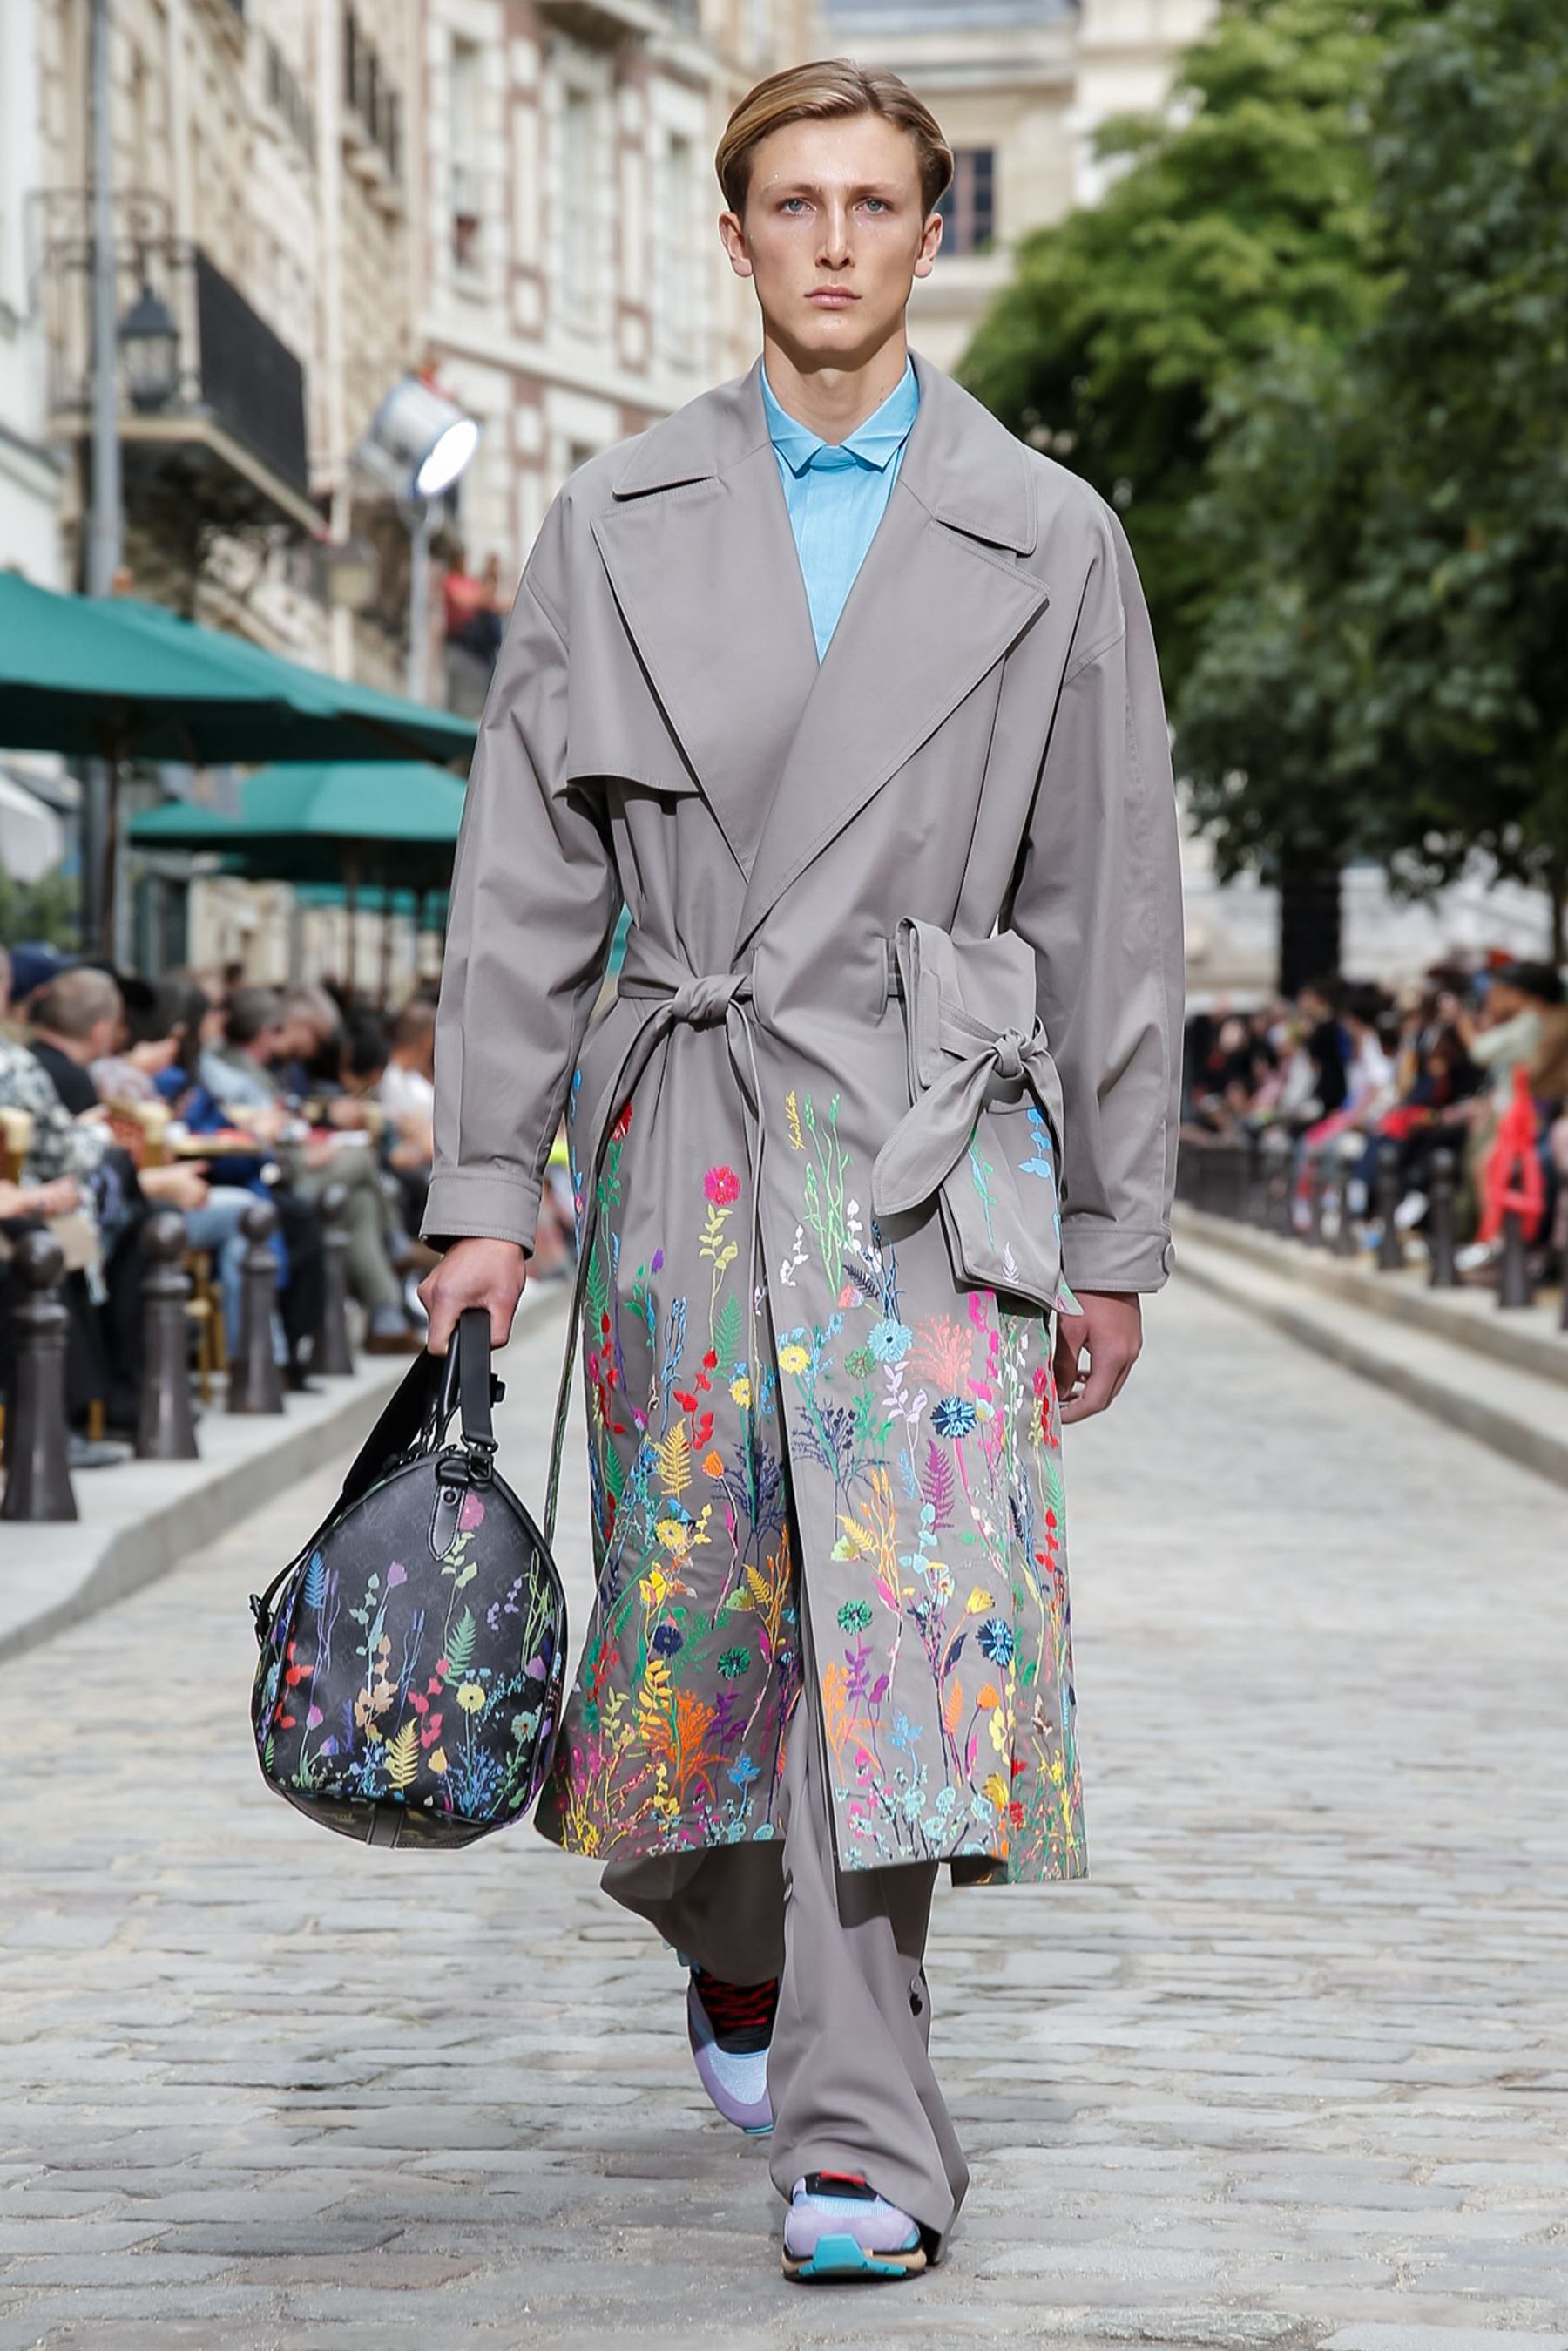 6 takeaways from the Louis Vuitton Men's Spring/Summer 2020